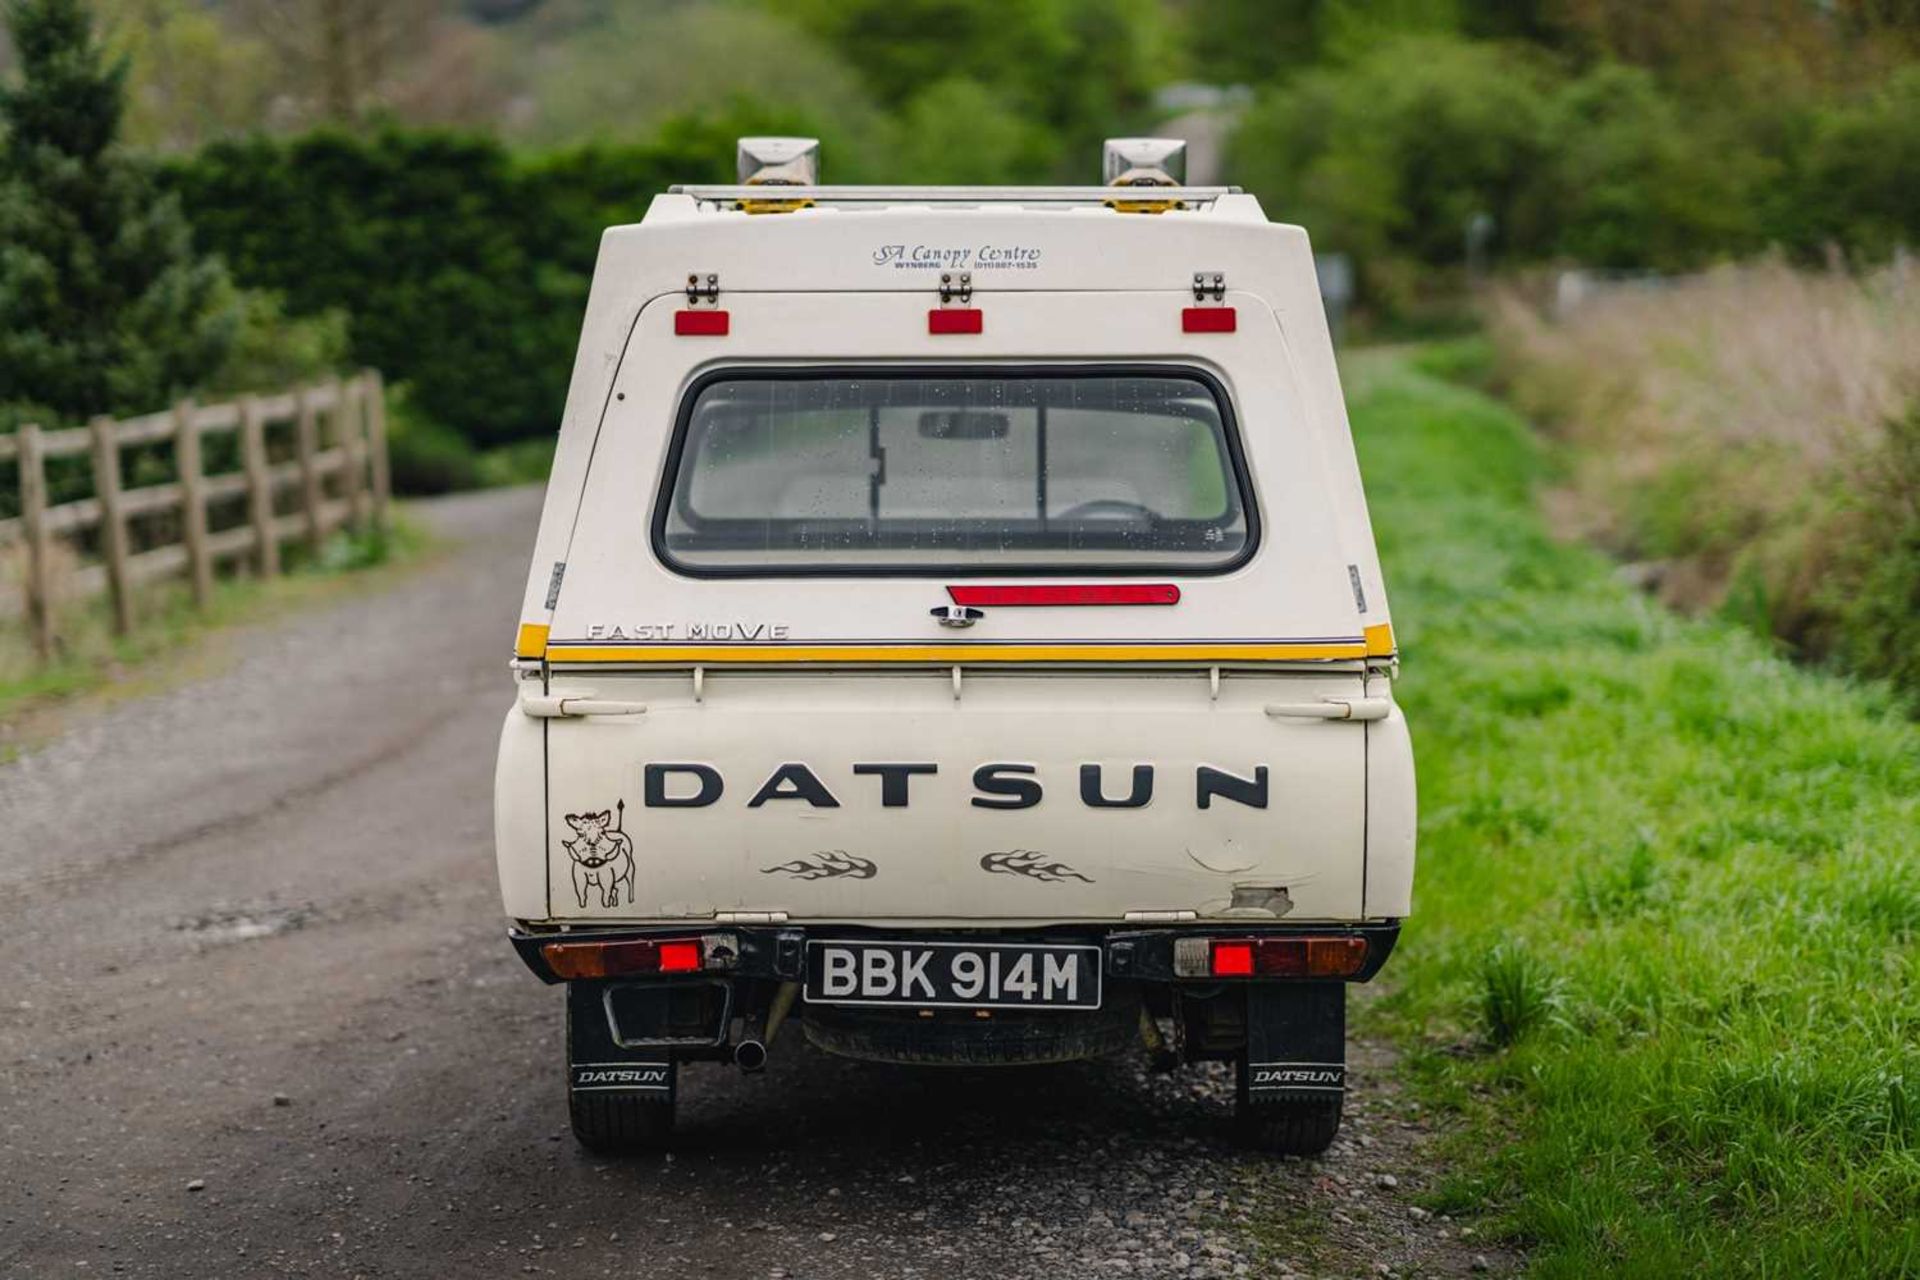 1974 Datsun 620 Pick-up Former museum exhibit in South Africa - Image 10 of 60